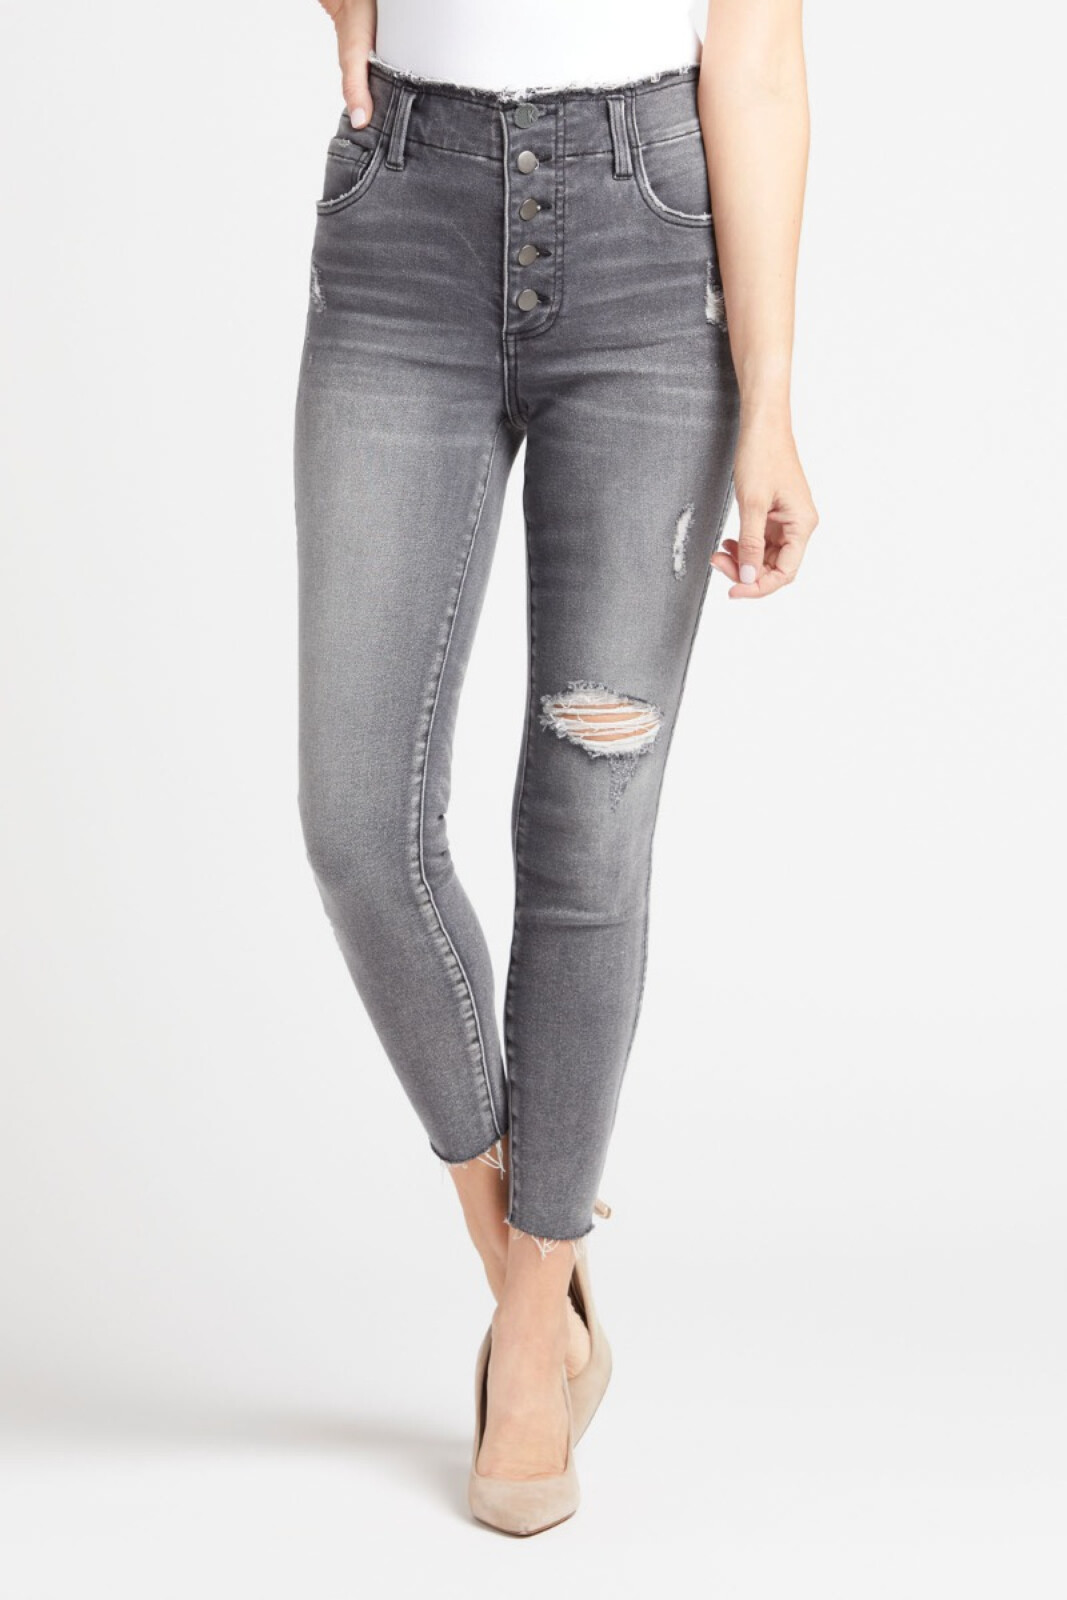 KUT FROM THE KLOTH Connie Ankle Skinny with Exposed Buttons | EVEREVE